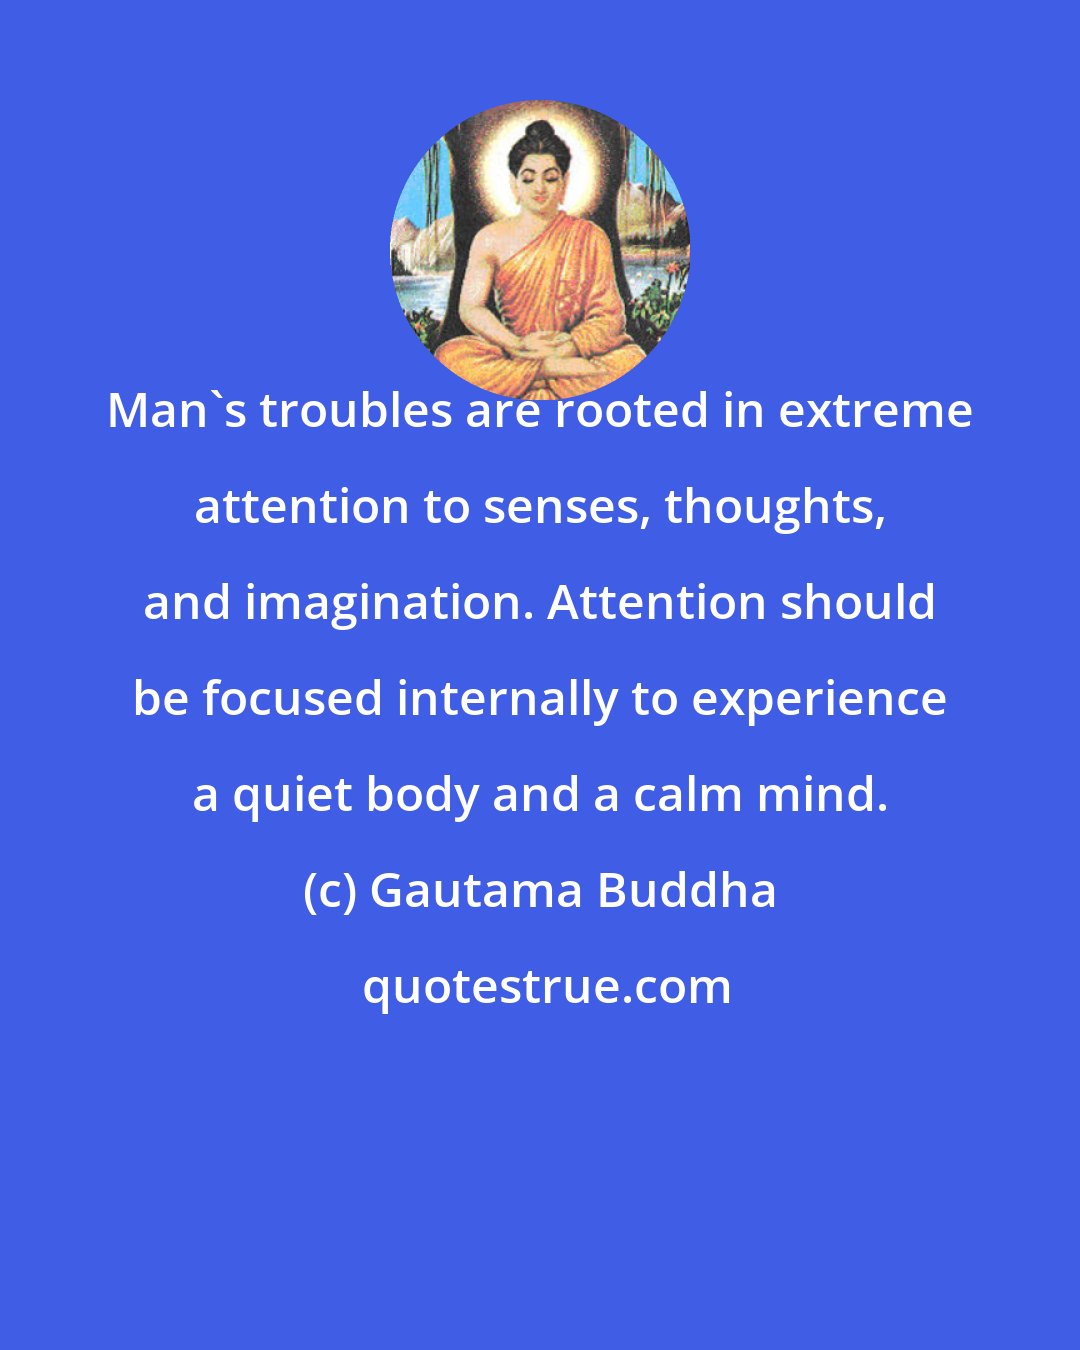 Gautama Buddha: Man's troubles are rooted in extreme attention to senses, thoughts, and imagination. Attention should be focused internally to experience a quiet body and a calm mind.